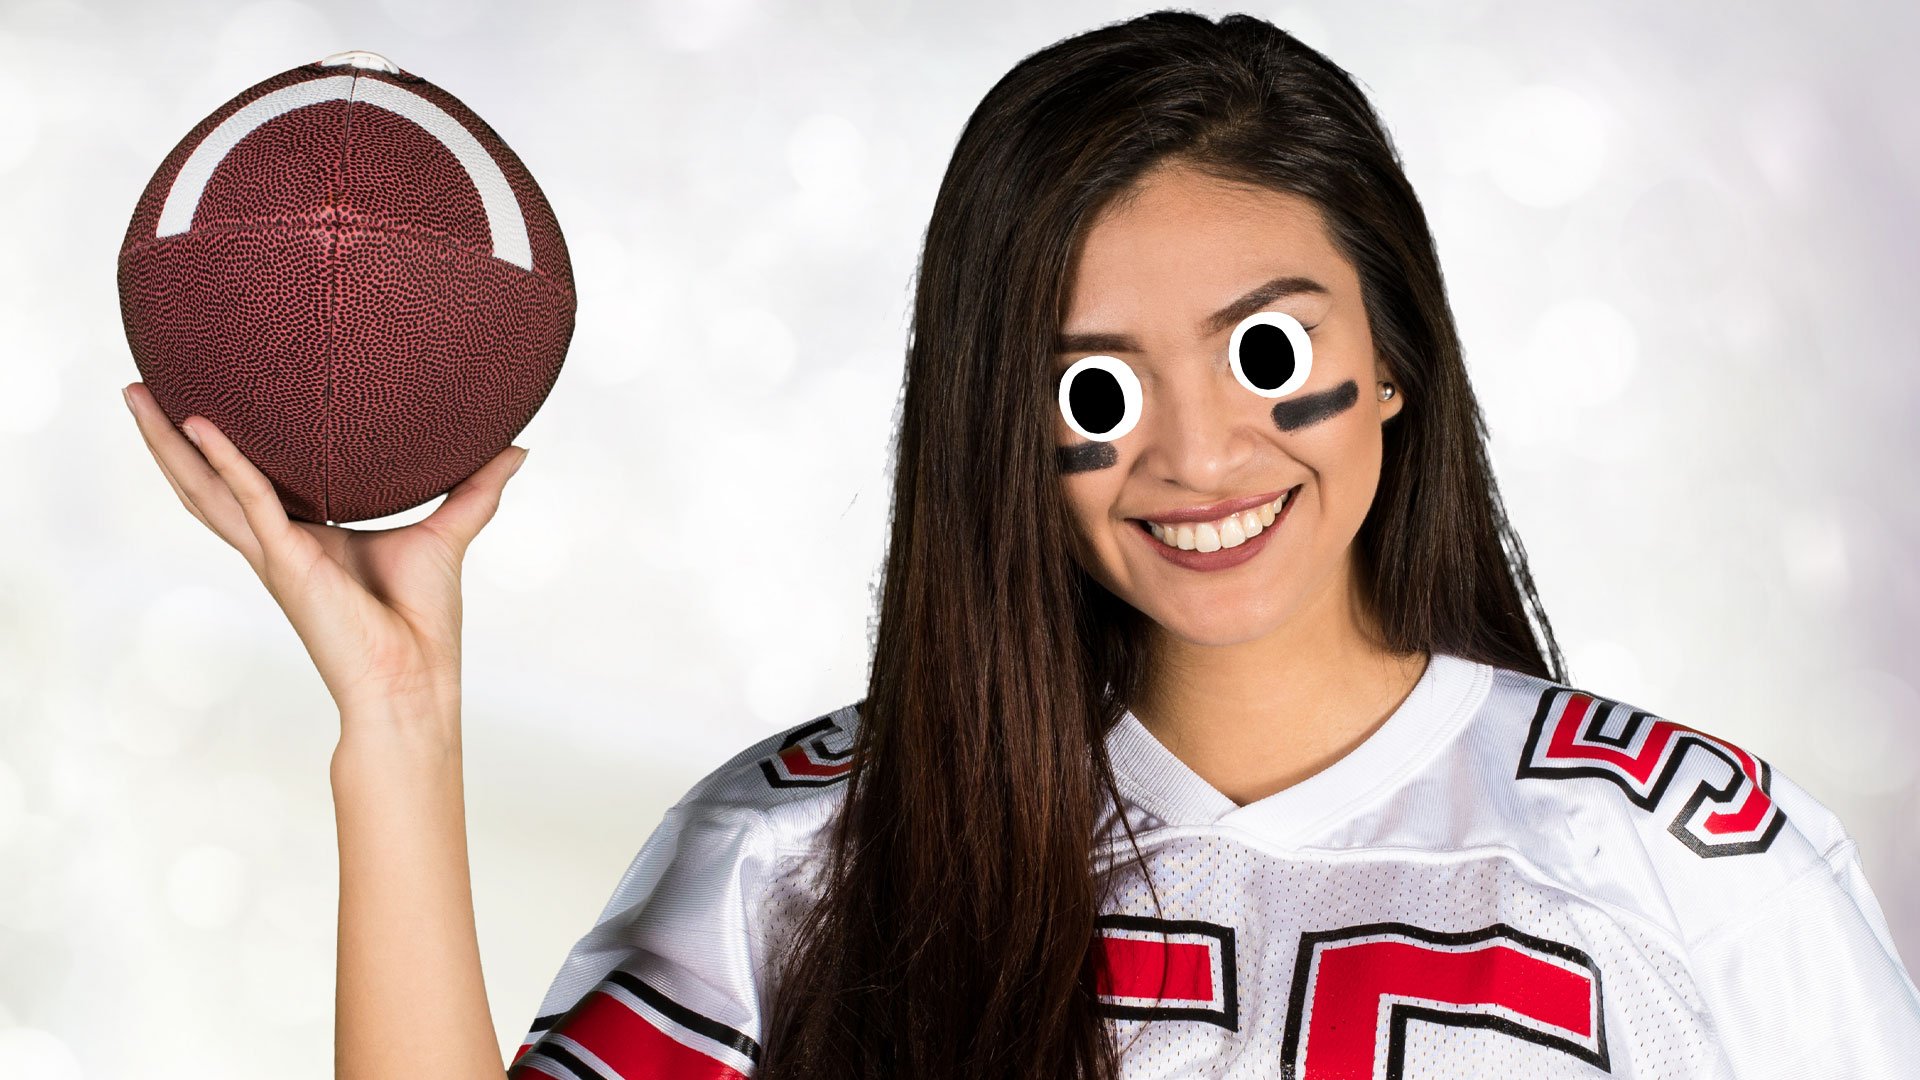 A woman holding an American football